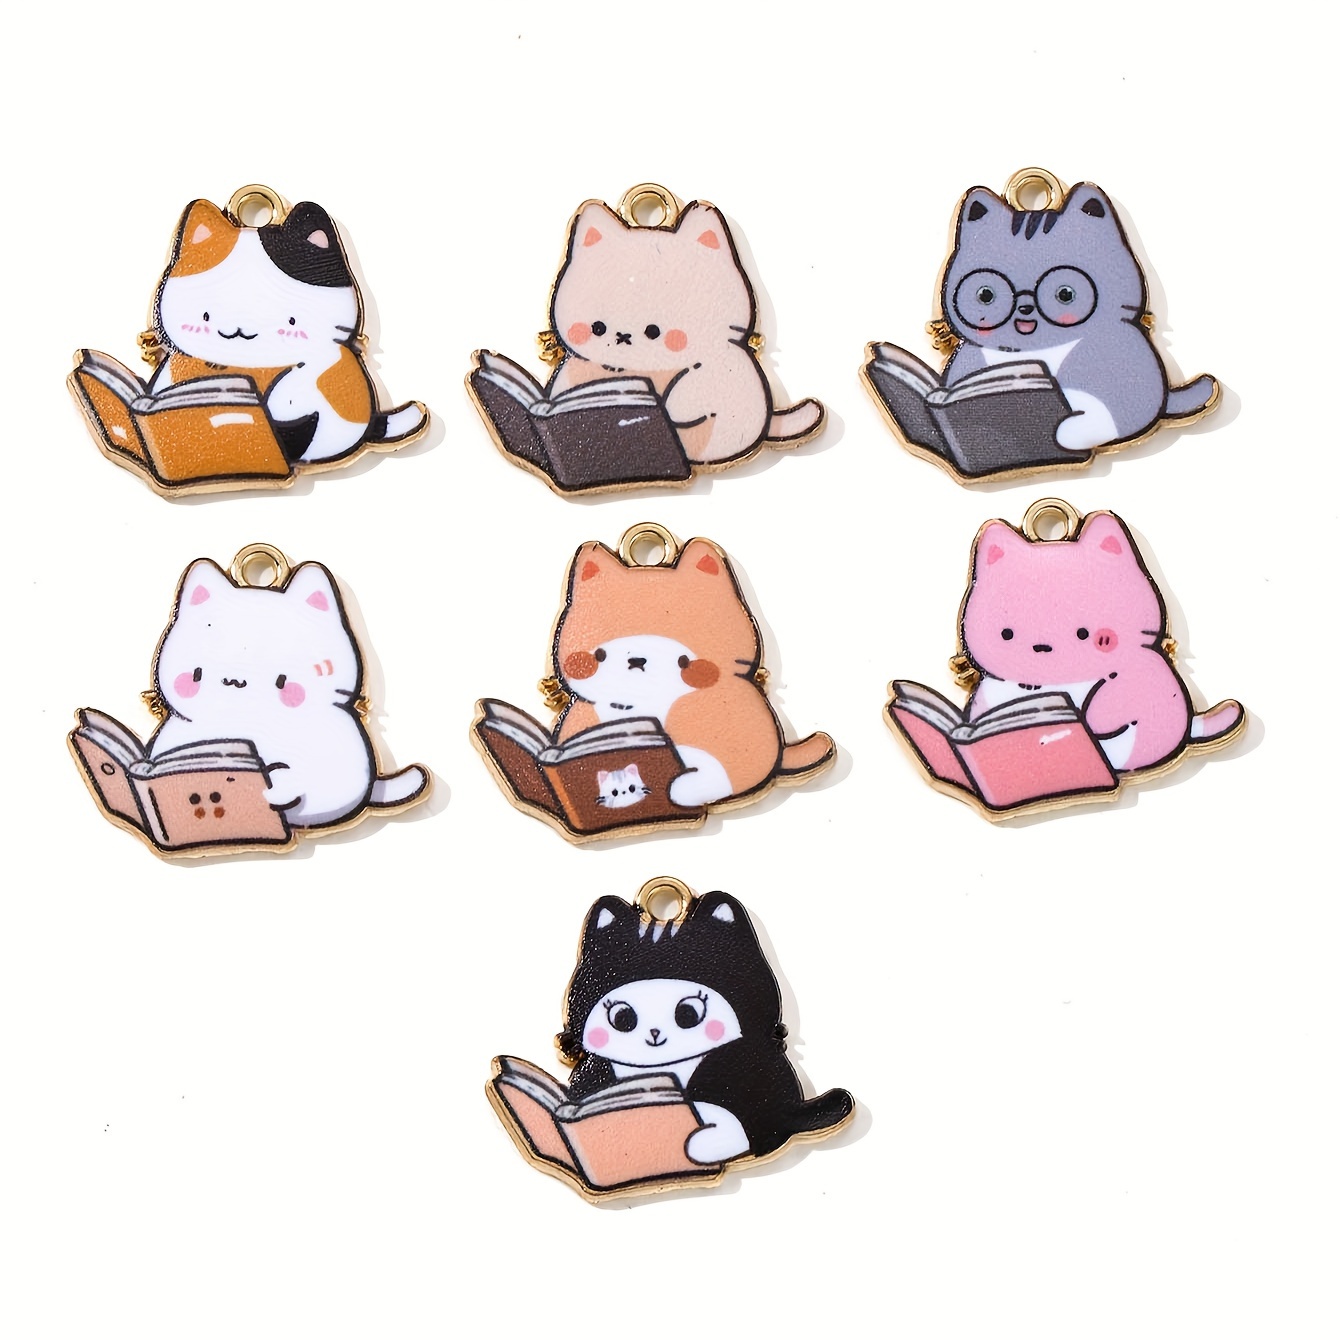 

Nxqxn Cat Charms Set Of 7, Reading Cats Enamel Alloy Pendants For Diy Jewelry Making, Necklace Earrings Crafting Supplies, Cute Book Lover Cat Gifts